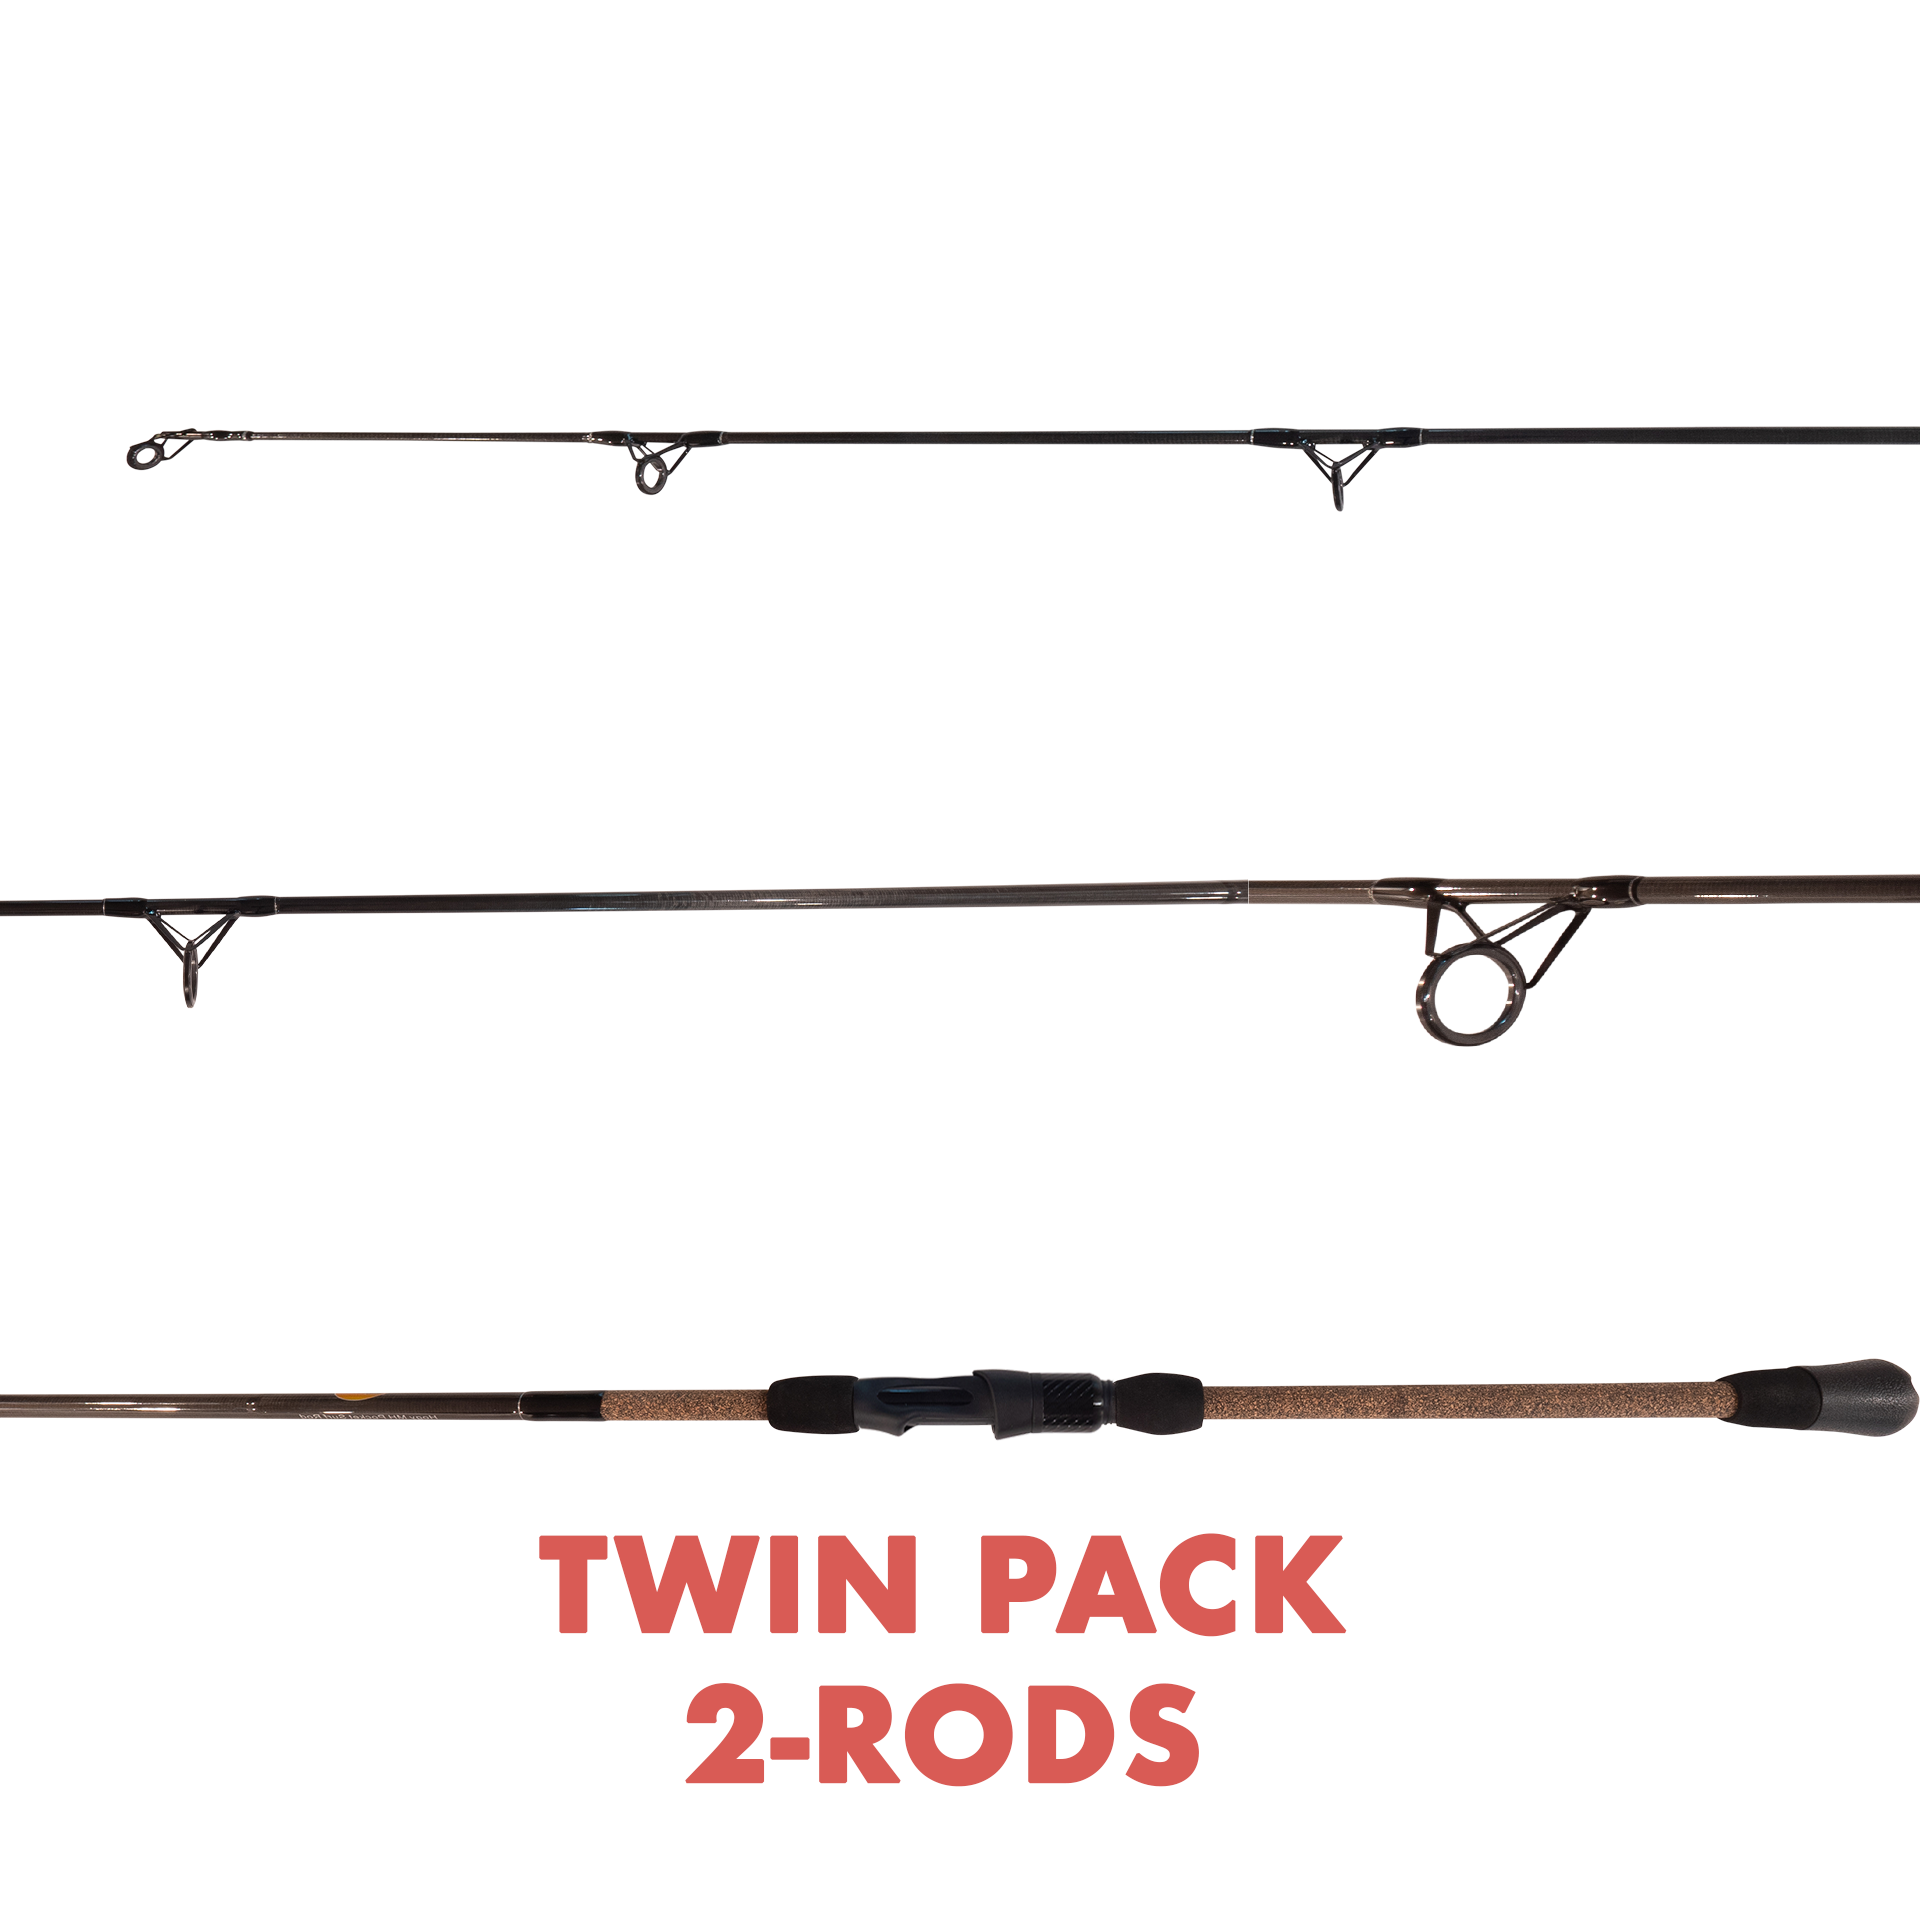 TWIN PACK Pocket Surf Rod: Mod-Fast Action 7' MH (1oz - 2oz) (Ship Date By 5/15)